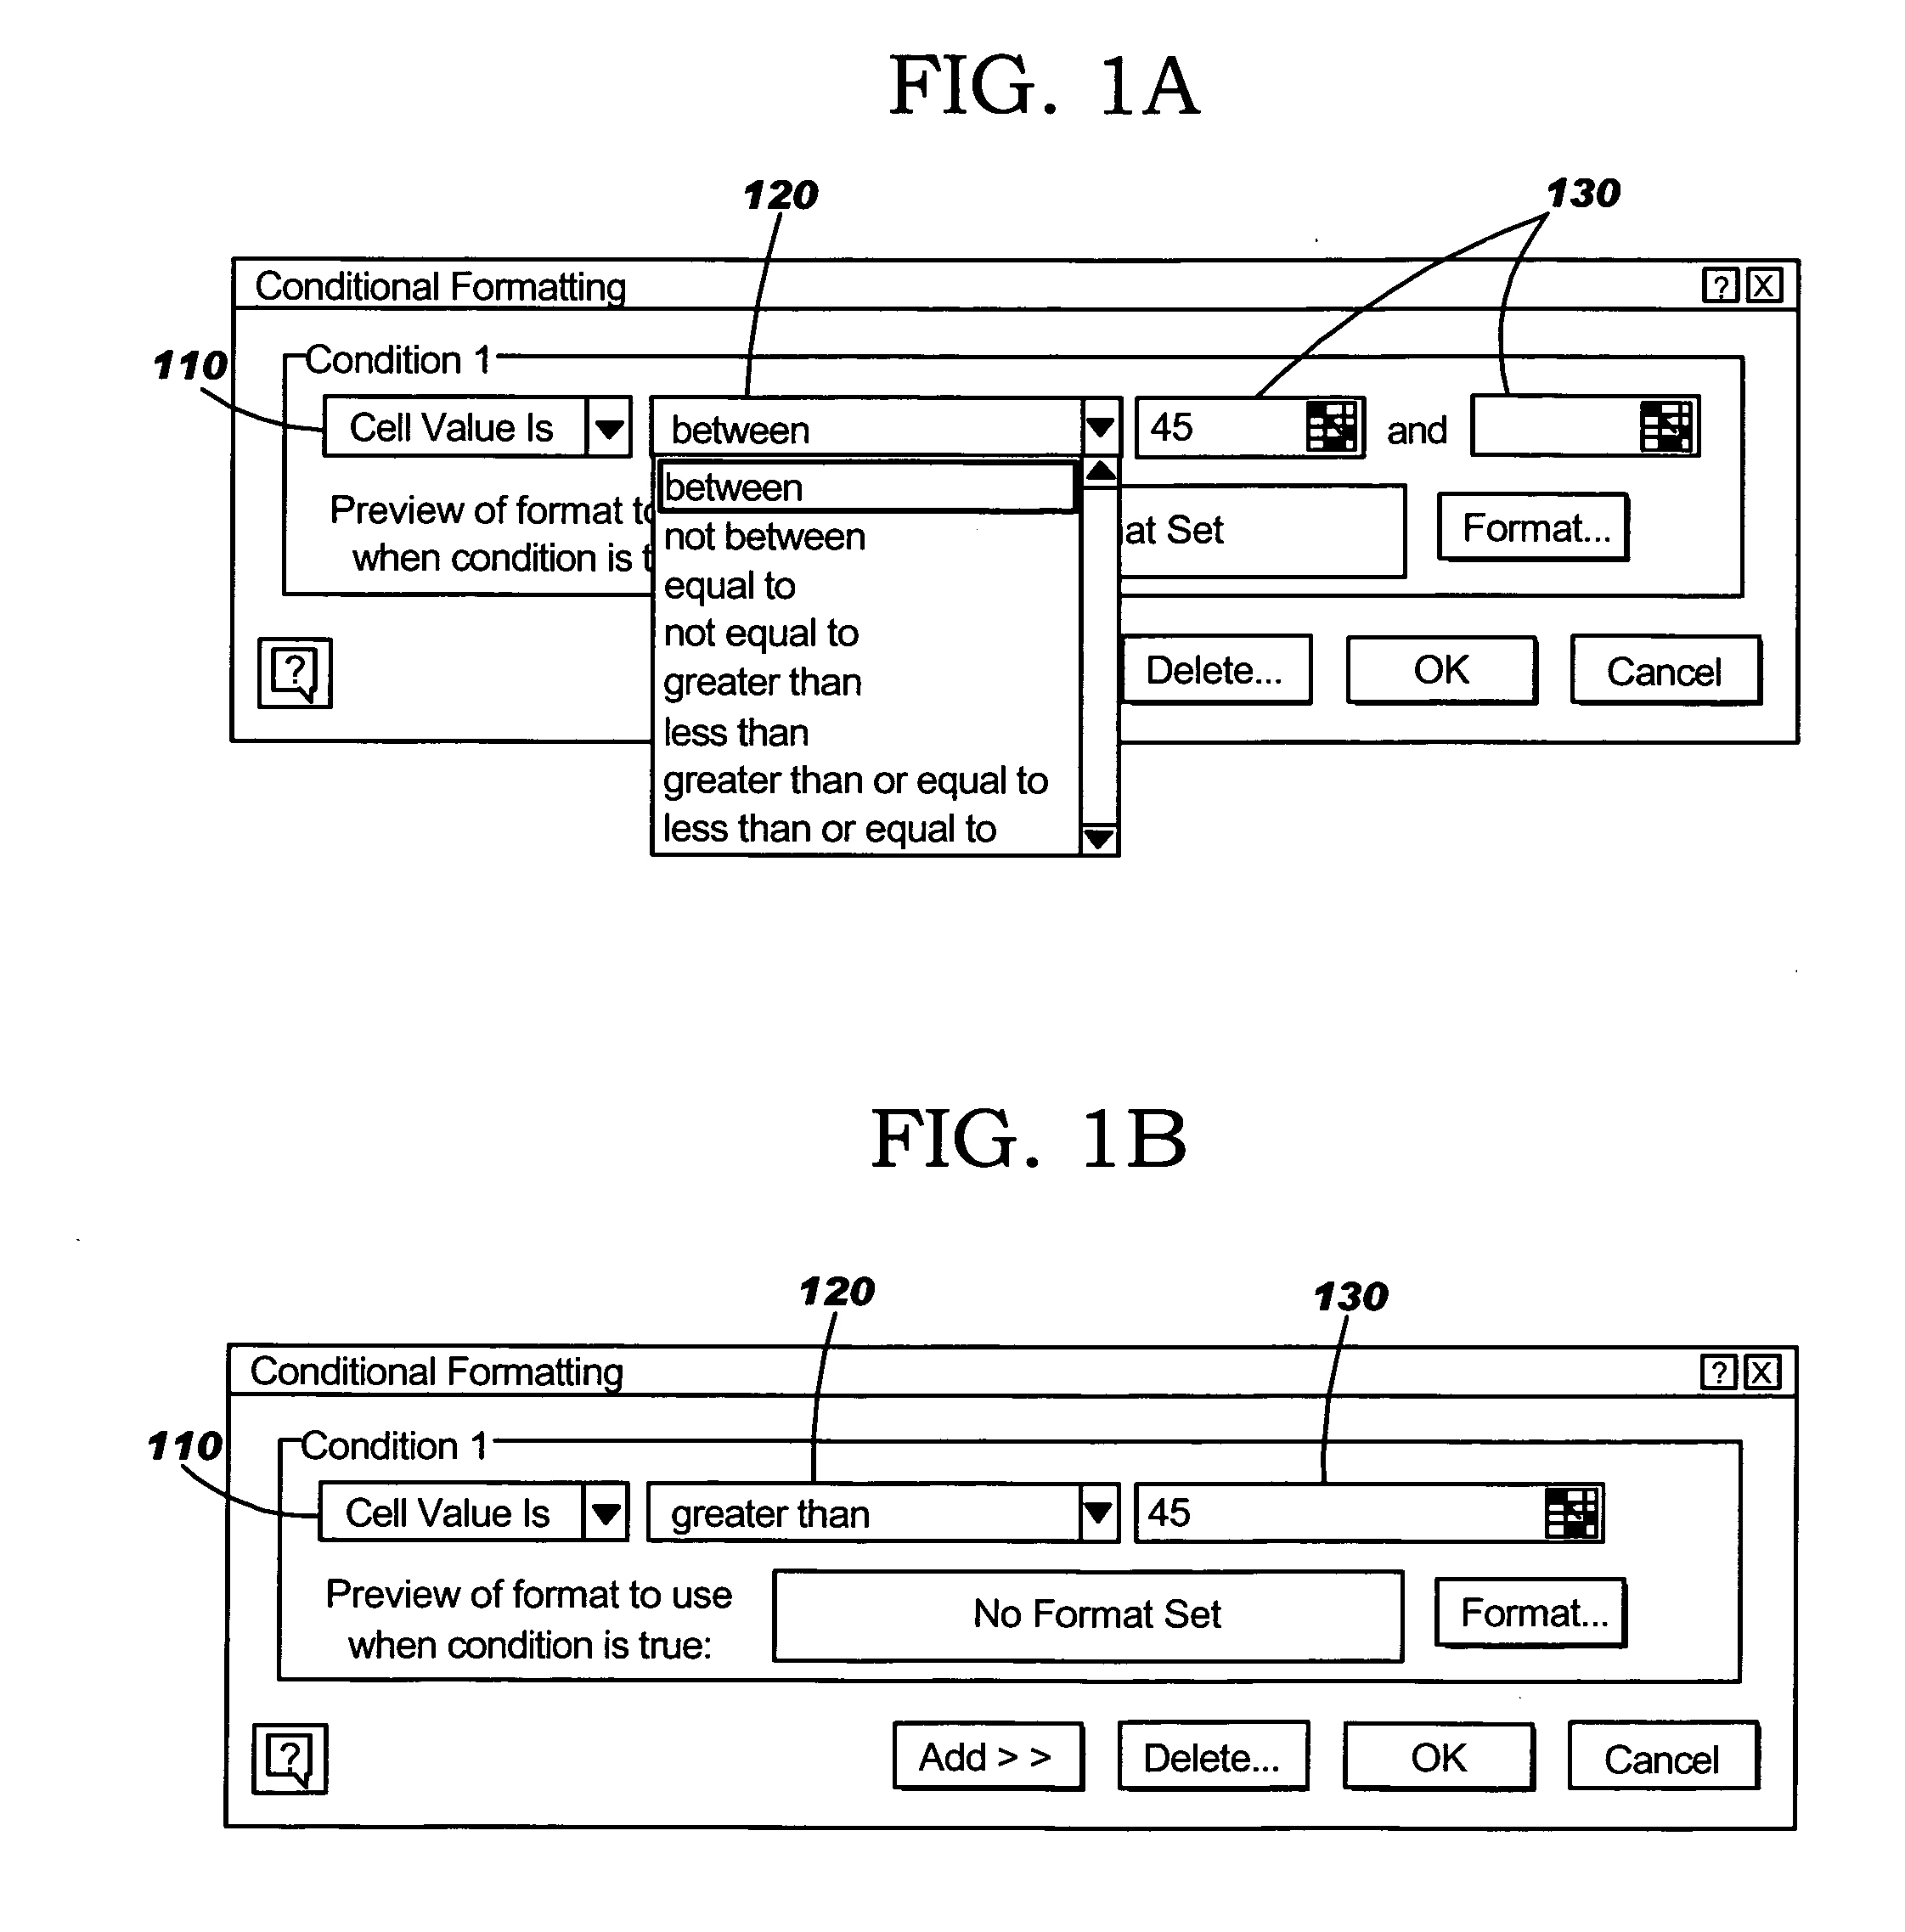 Apparatus and method for providing a condition builder interface